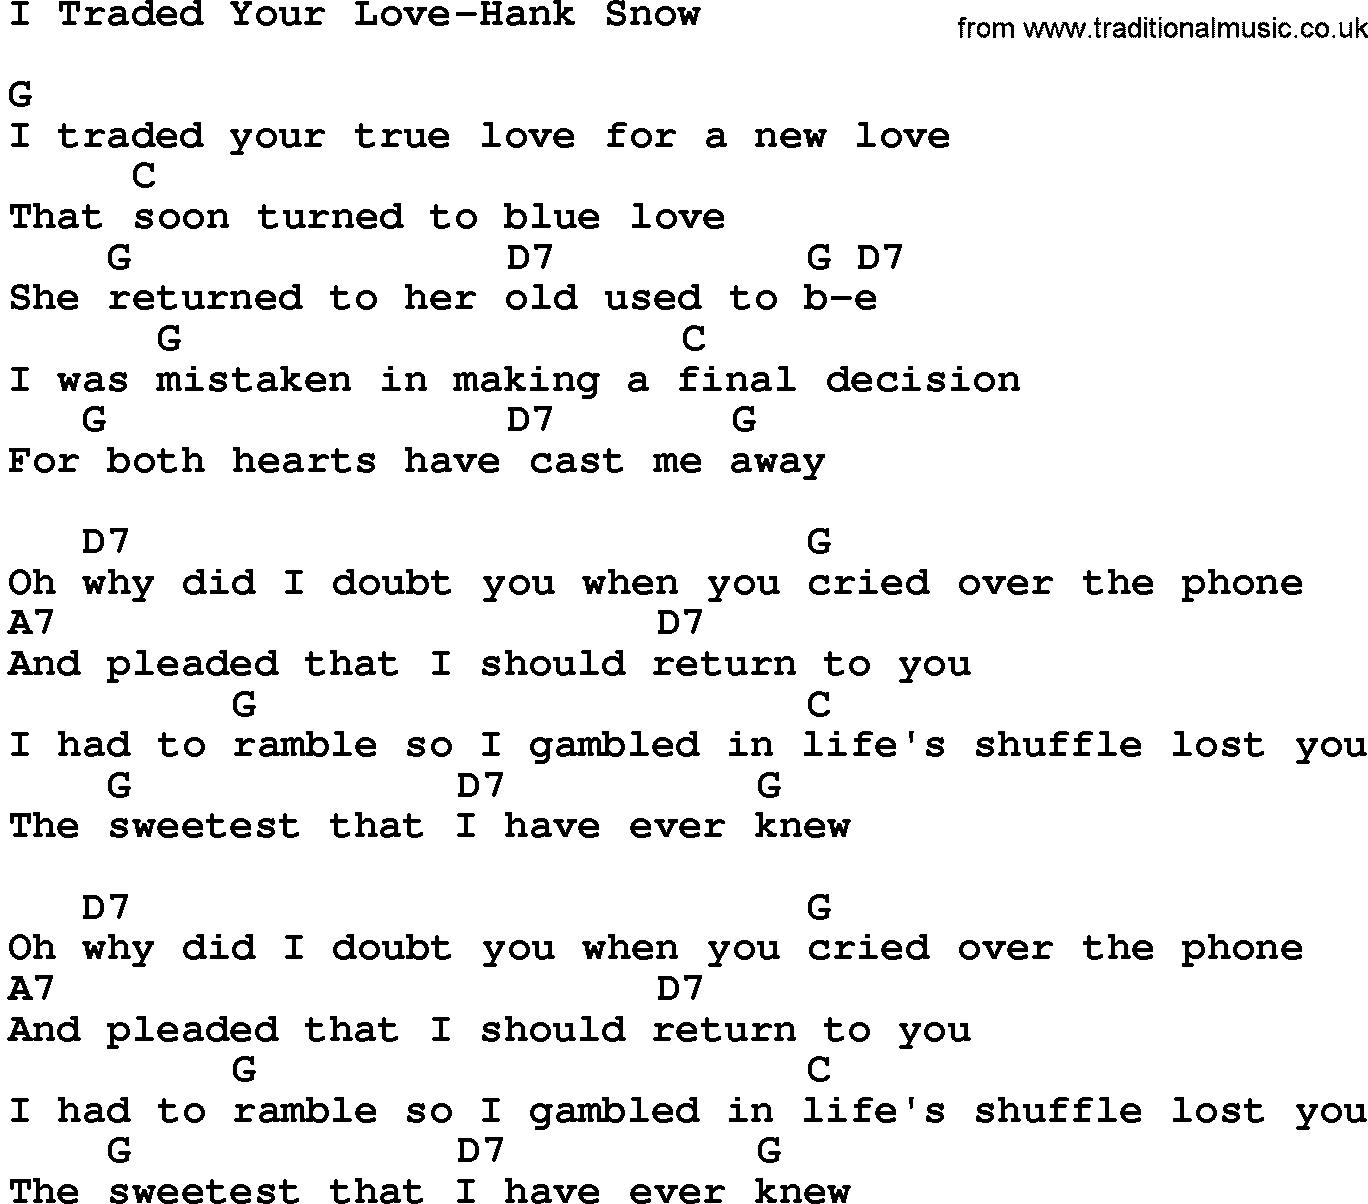 Country music song: I Traded Your Love-Hank Snow lyrics and chords